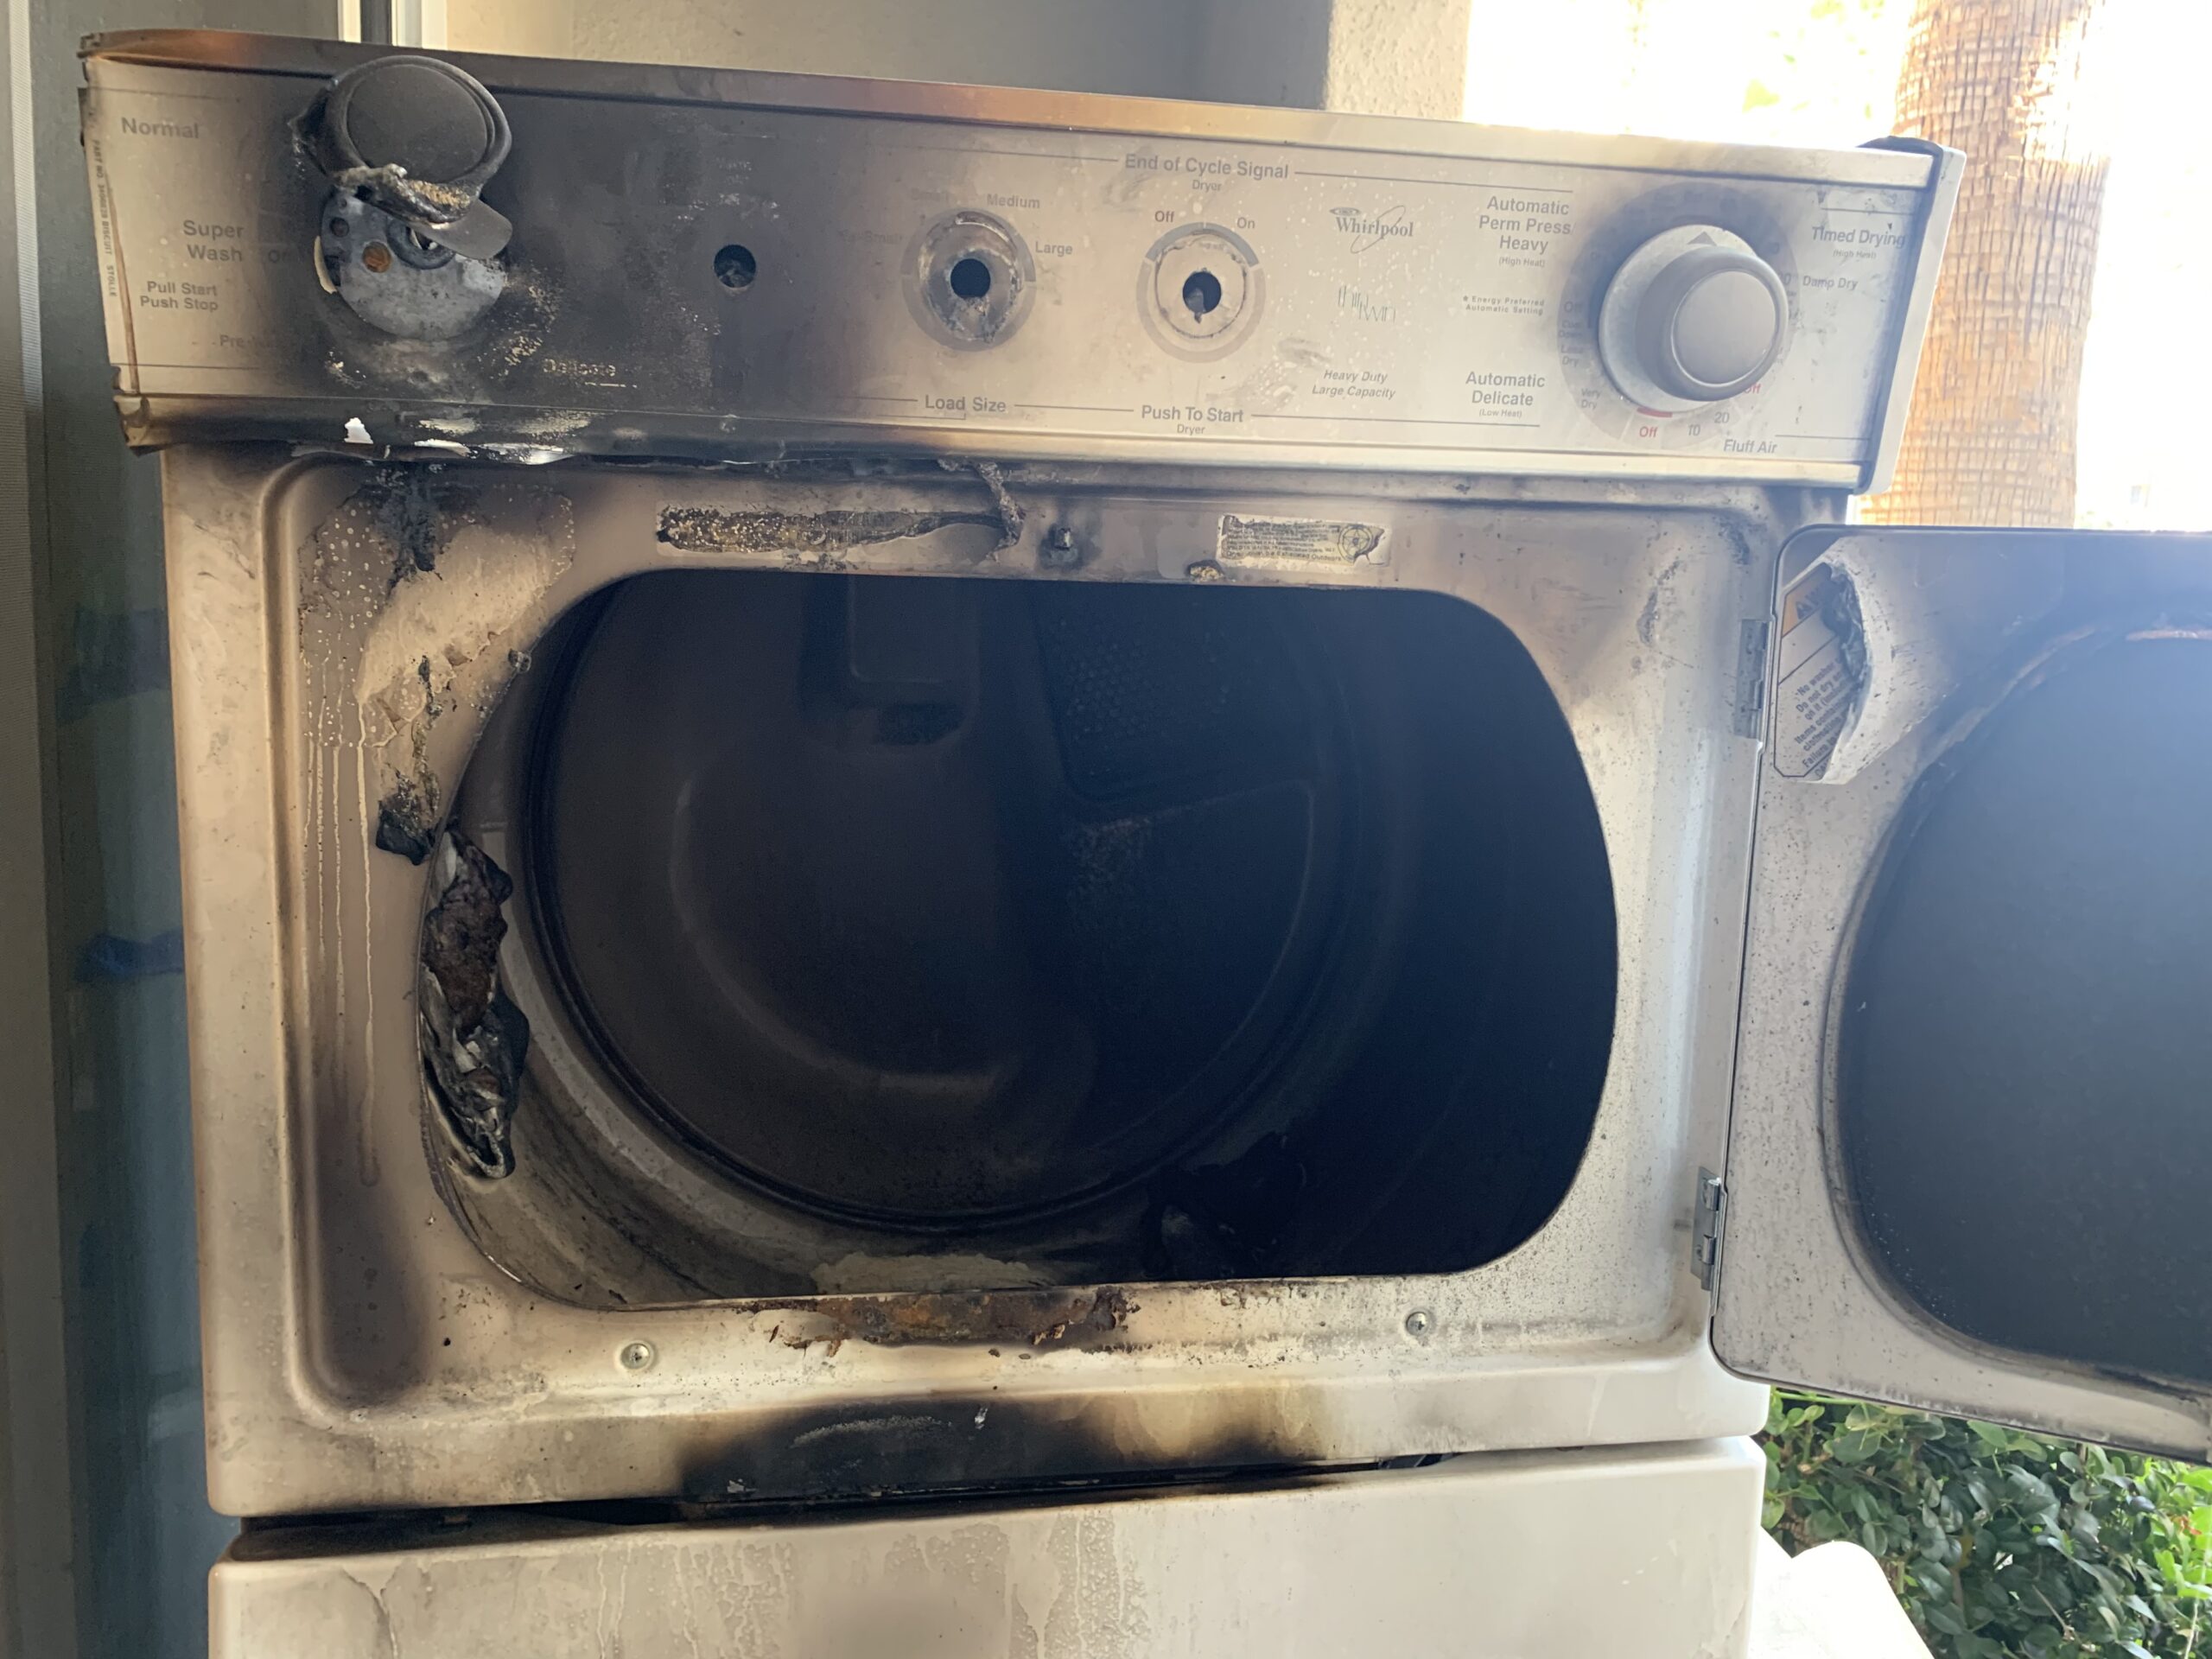 Burnt Dryer caused by the lint trap getting clogged and catching fire